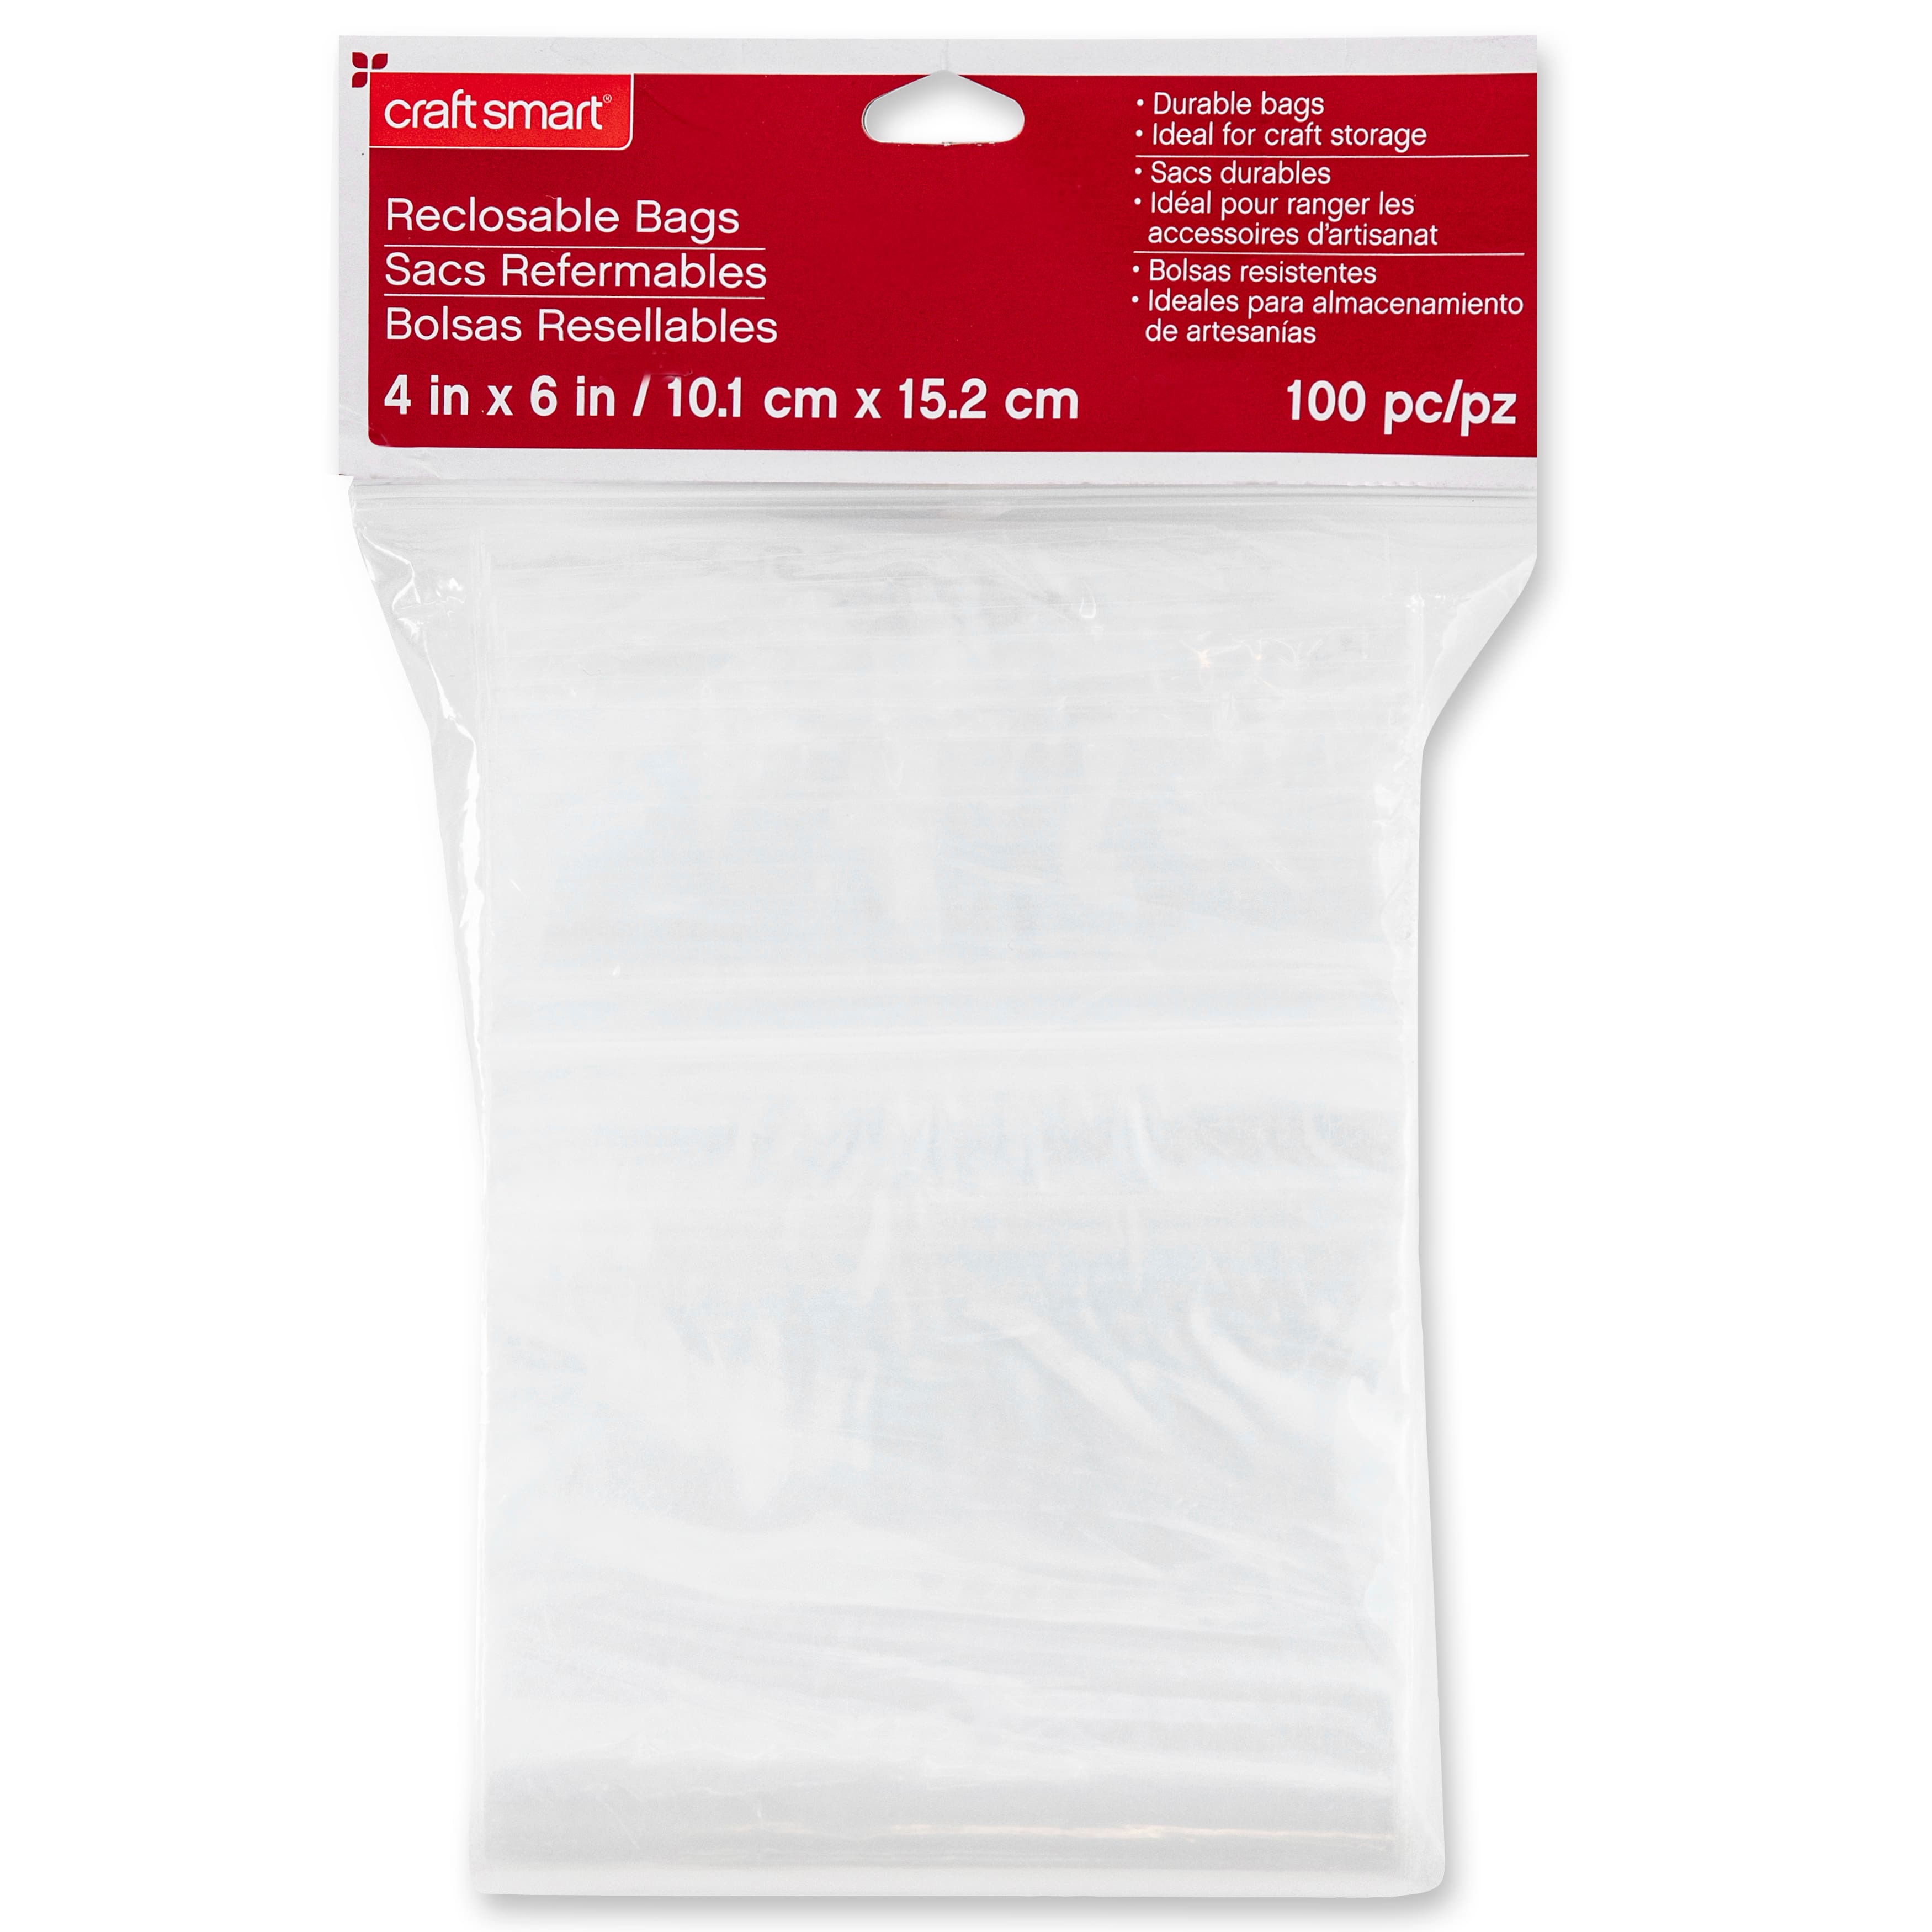 12 Packs: 100 ct. (1200 total) Recloseable Bags by Craft Smart&#xAE;